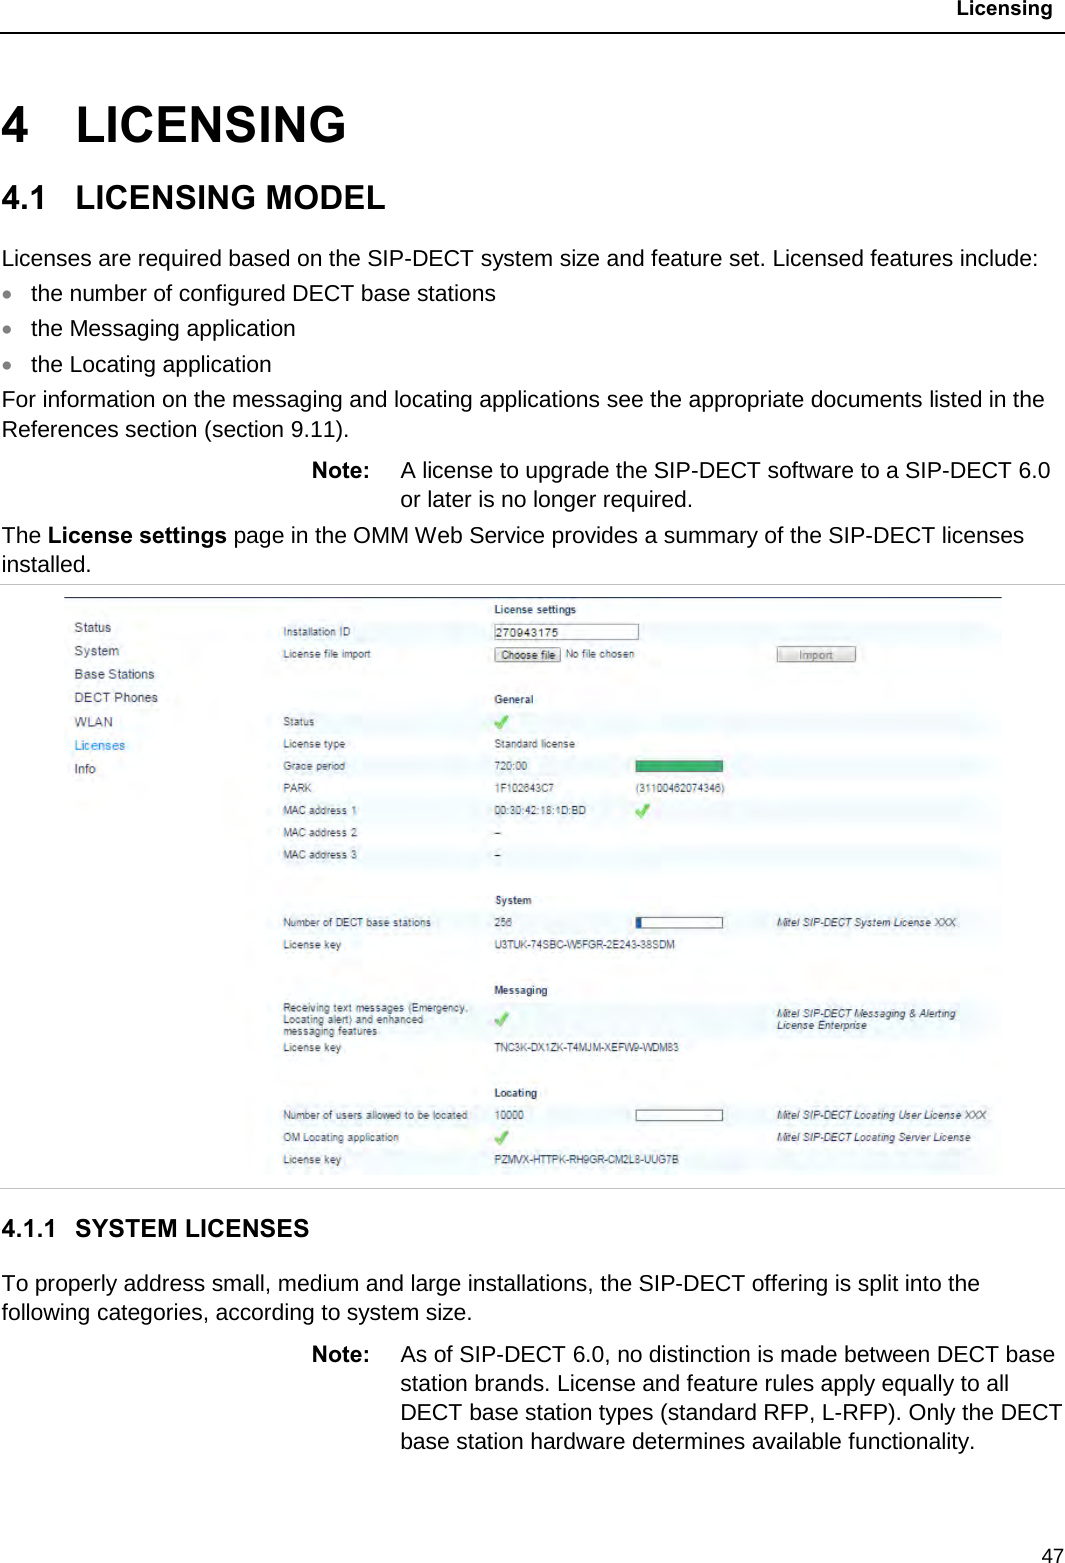  Licensing  47 4  LICENSING 4.1  LICENSING MODEL Licenses are required based on the SIP-DECT system size and feature set. Licensed features include: • the number of configured DECT base stations • the Messaging application  • the Locating application For information on the messaging and locating applications see the appropriate documents listed in the References section (section 9.11). Note: A license to upgrade the SIP-DECT software to a SIP-DECT 6.0 or later is no longer required.  The License settings page in the OMM Web Service provides a summary of the SIP-DECT licenses installed.  4.1.1 SYSTEM LICENSES To properly address small, medium and large installations, the SIP-DECT offering is split into the following categories, according to system size.  Note: As of SIP-DECT 6.0, no distinction is made between DECT base station brands. License and feature rules apply equally to all DECT base station types (standard RFP, L-RFP). Only the DECT base station hardware determines available functionality.  